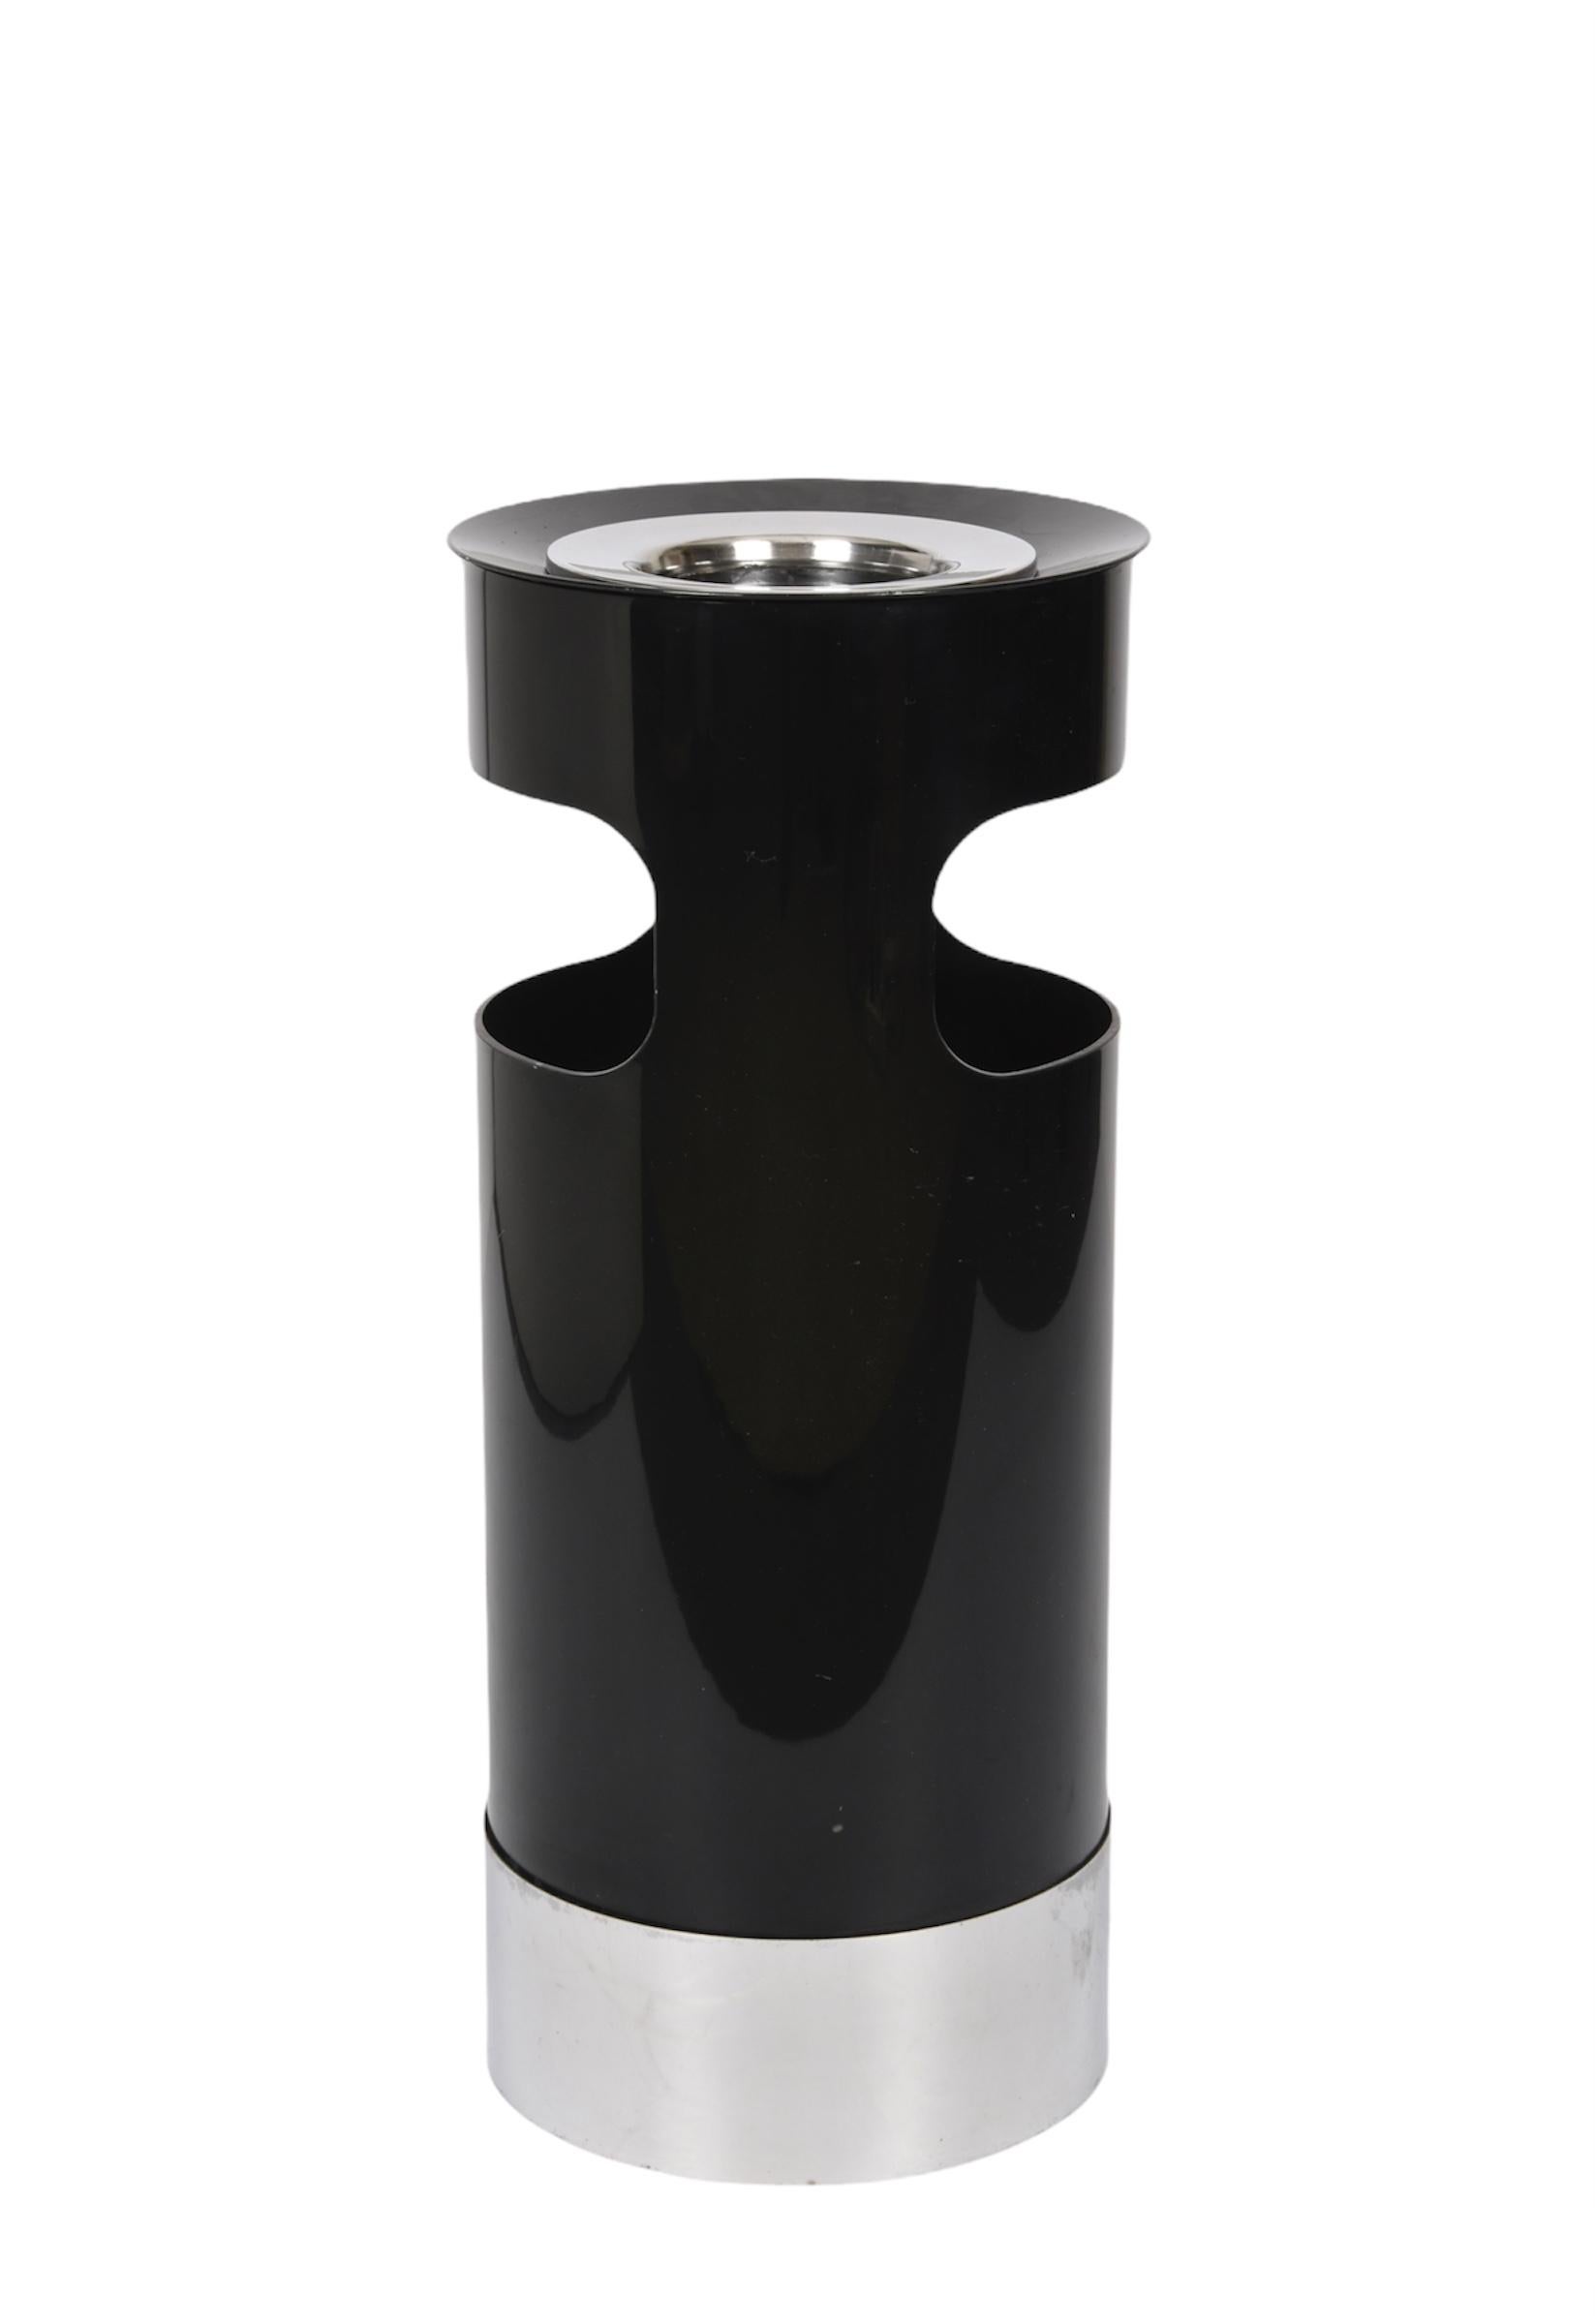 Gino Colombini Midcentury Black Umbrella Stands or Ashtray for Kartell, 1970 In Good Condition For Sale In Roma, IT